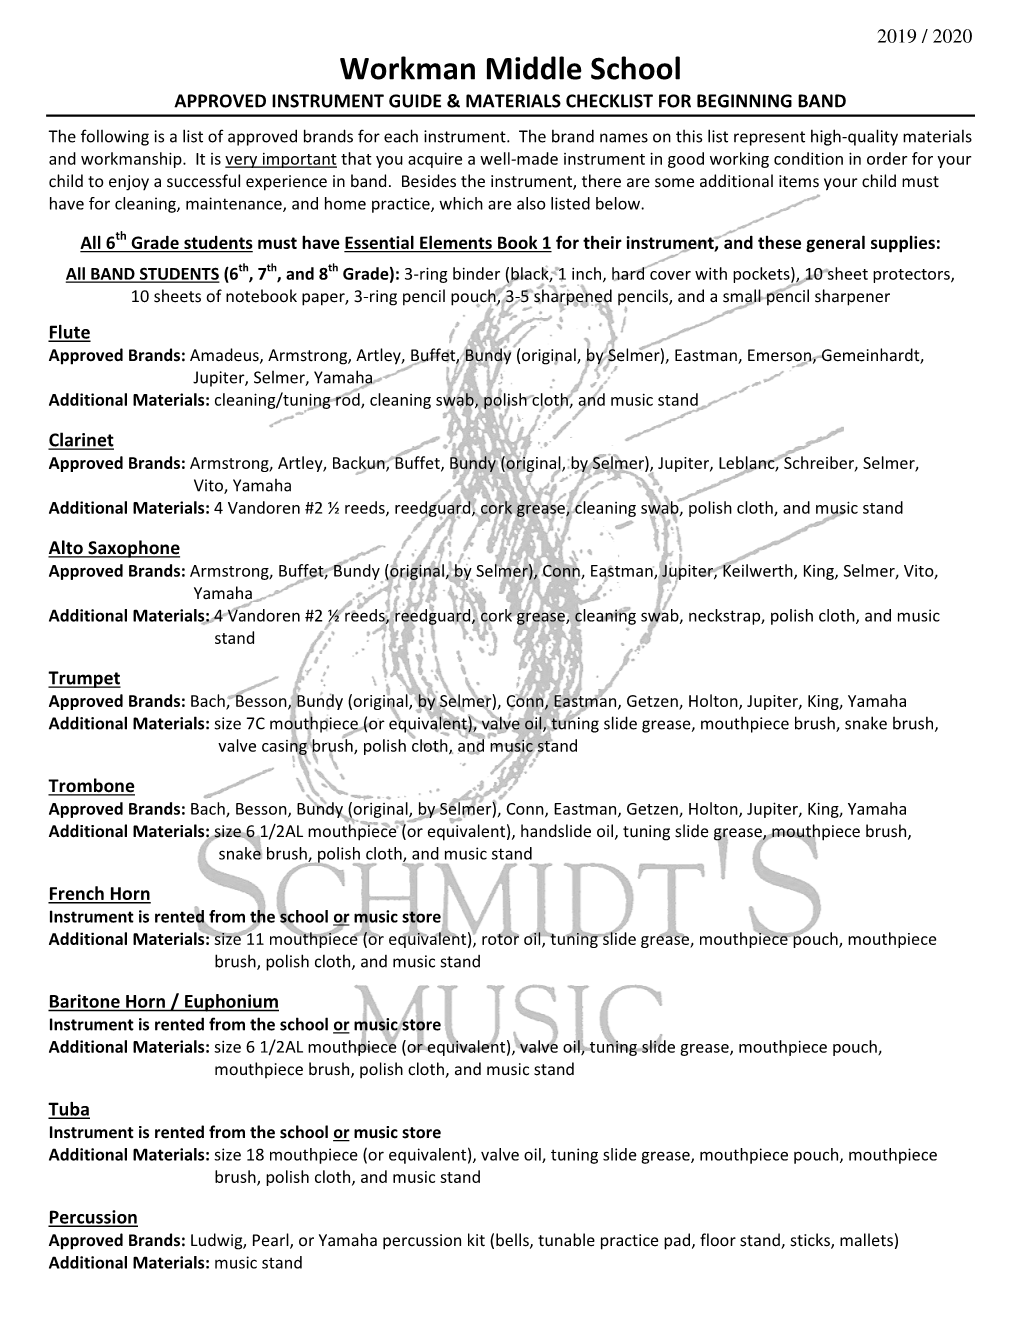 Workman Middle School APPROVED INSTRUMENT GUIDE & MATERIALS CHECKLIST for BEGINNING BAND